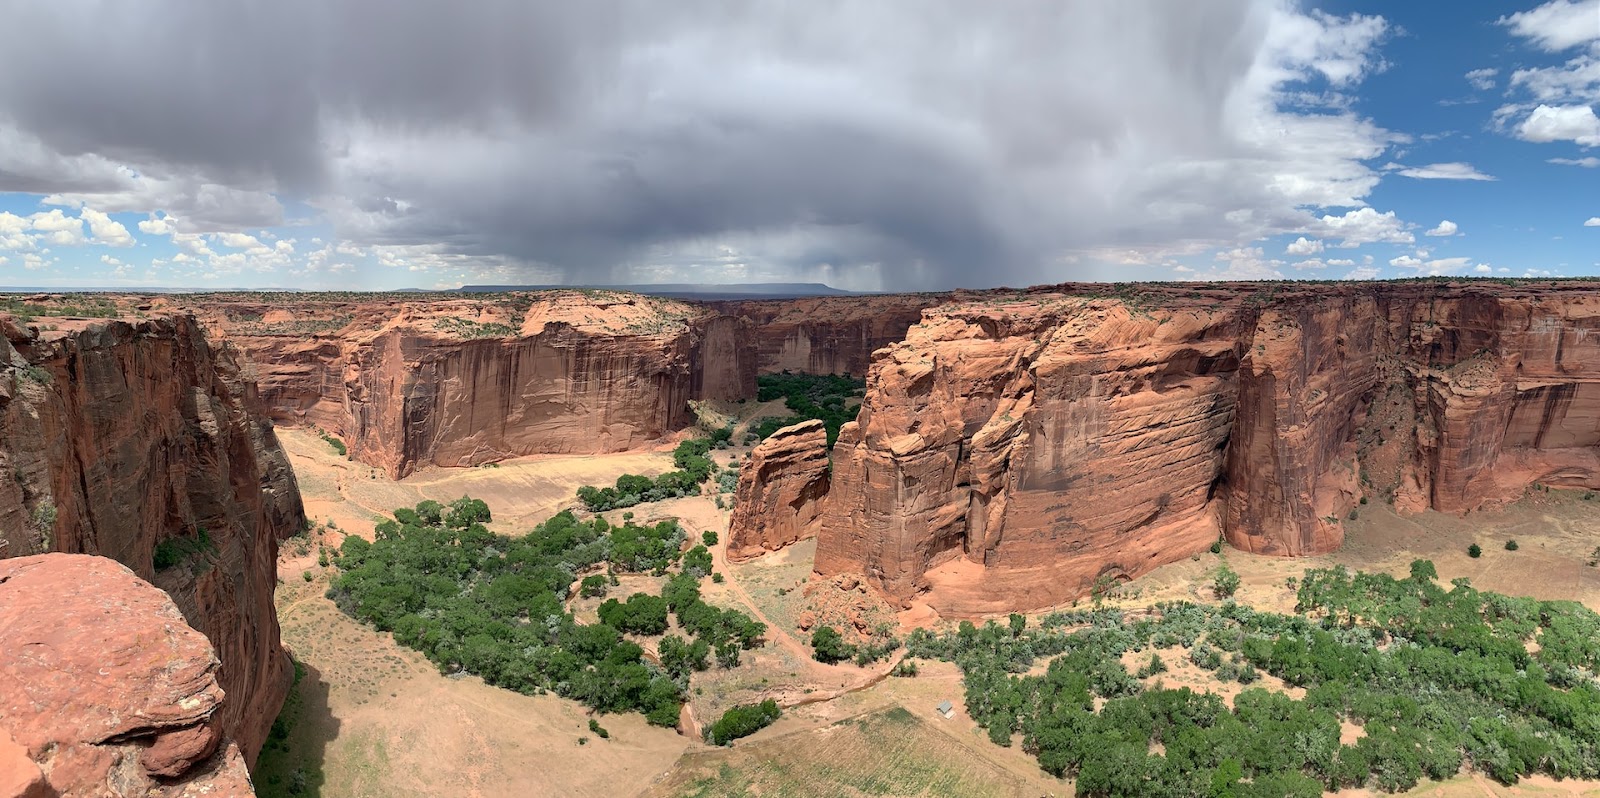 ON a Four Corners Road Trip you'll want to stop at Canyon de Chelly National Monument.